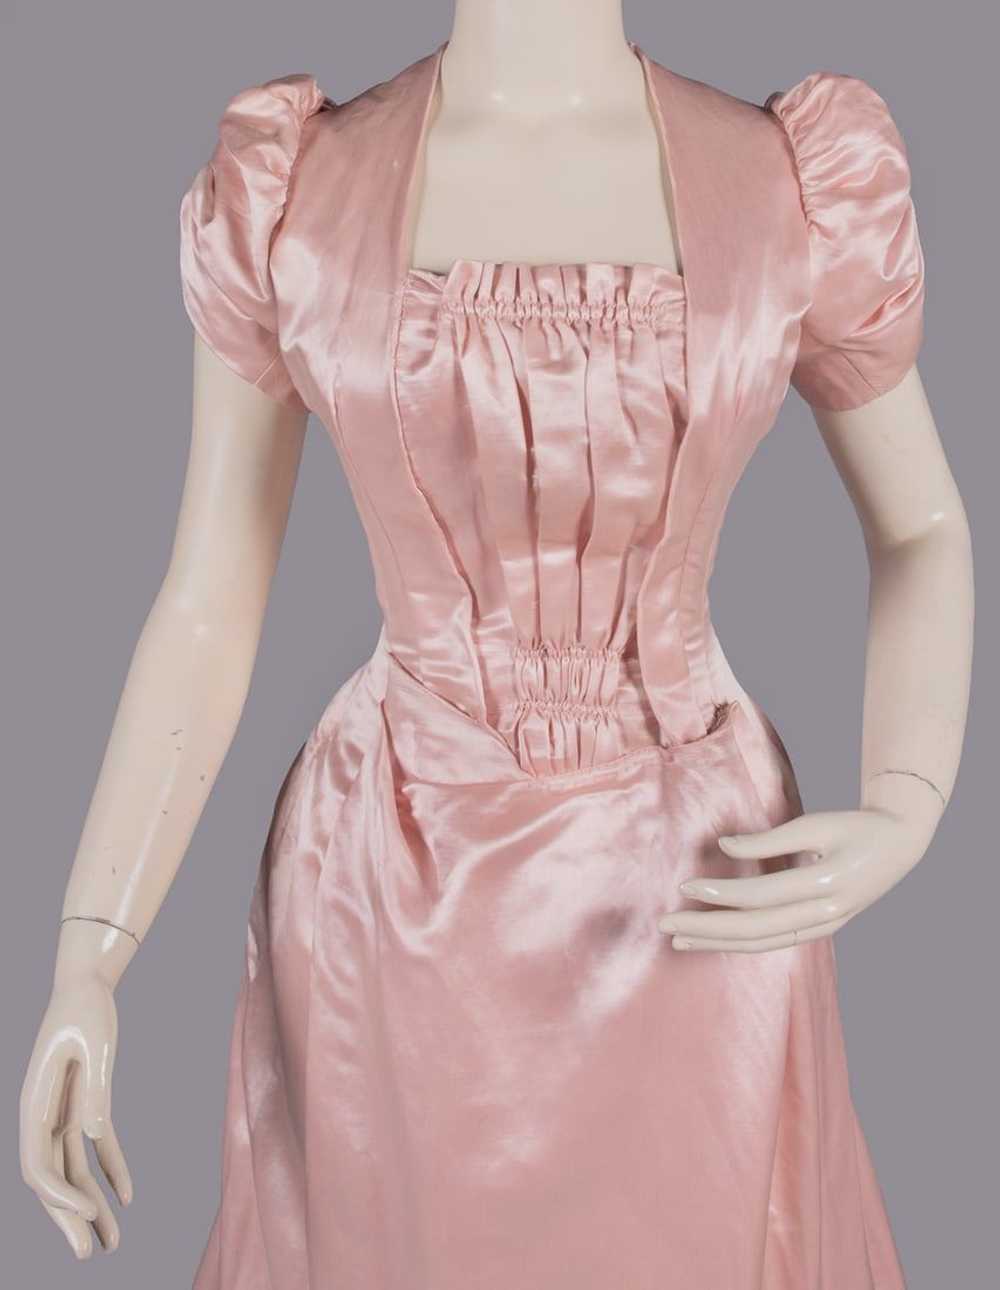 BLUSH PINK SILK SATIN EVENING GOWN, LATE 1880s - image 5